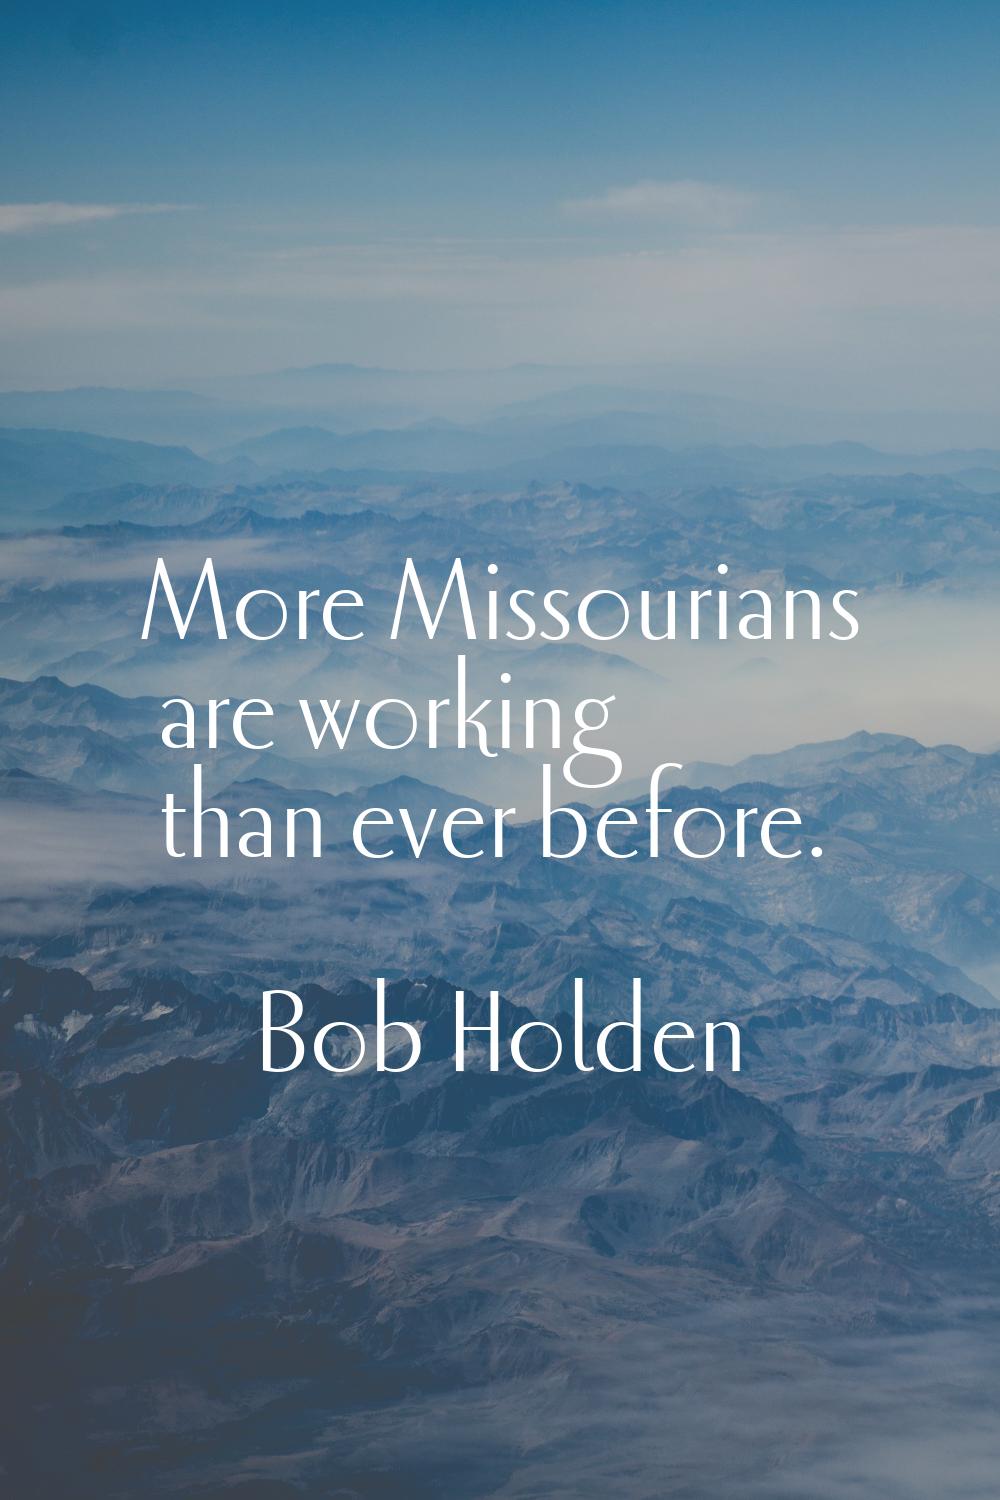 More Missourians are working than ever before.